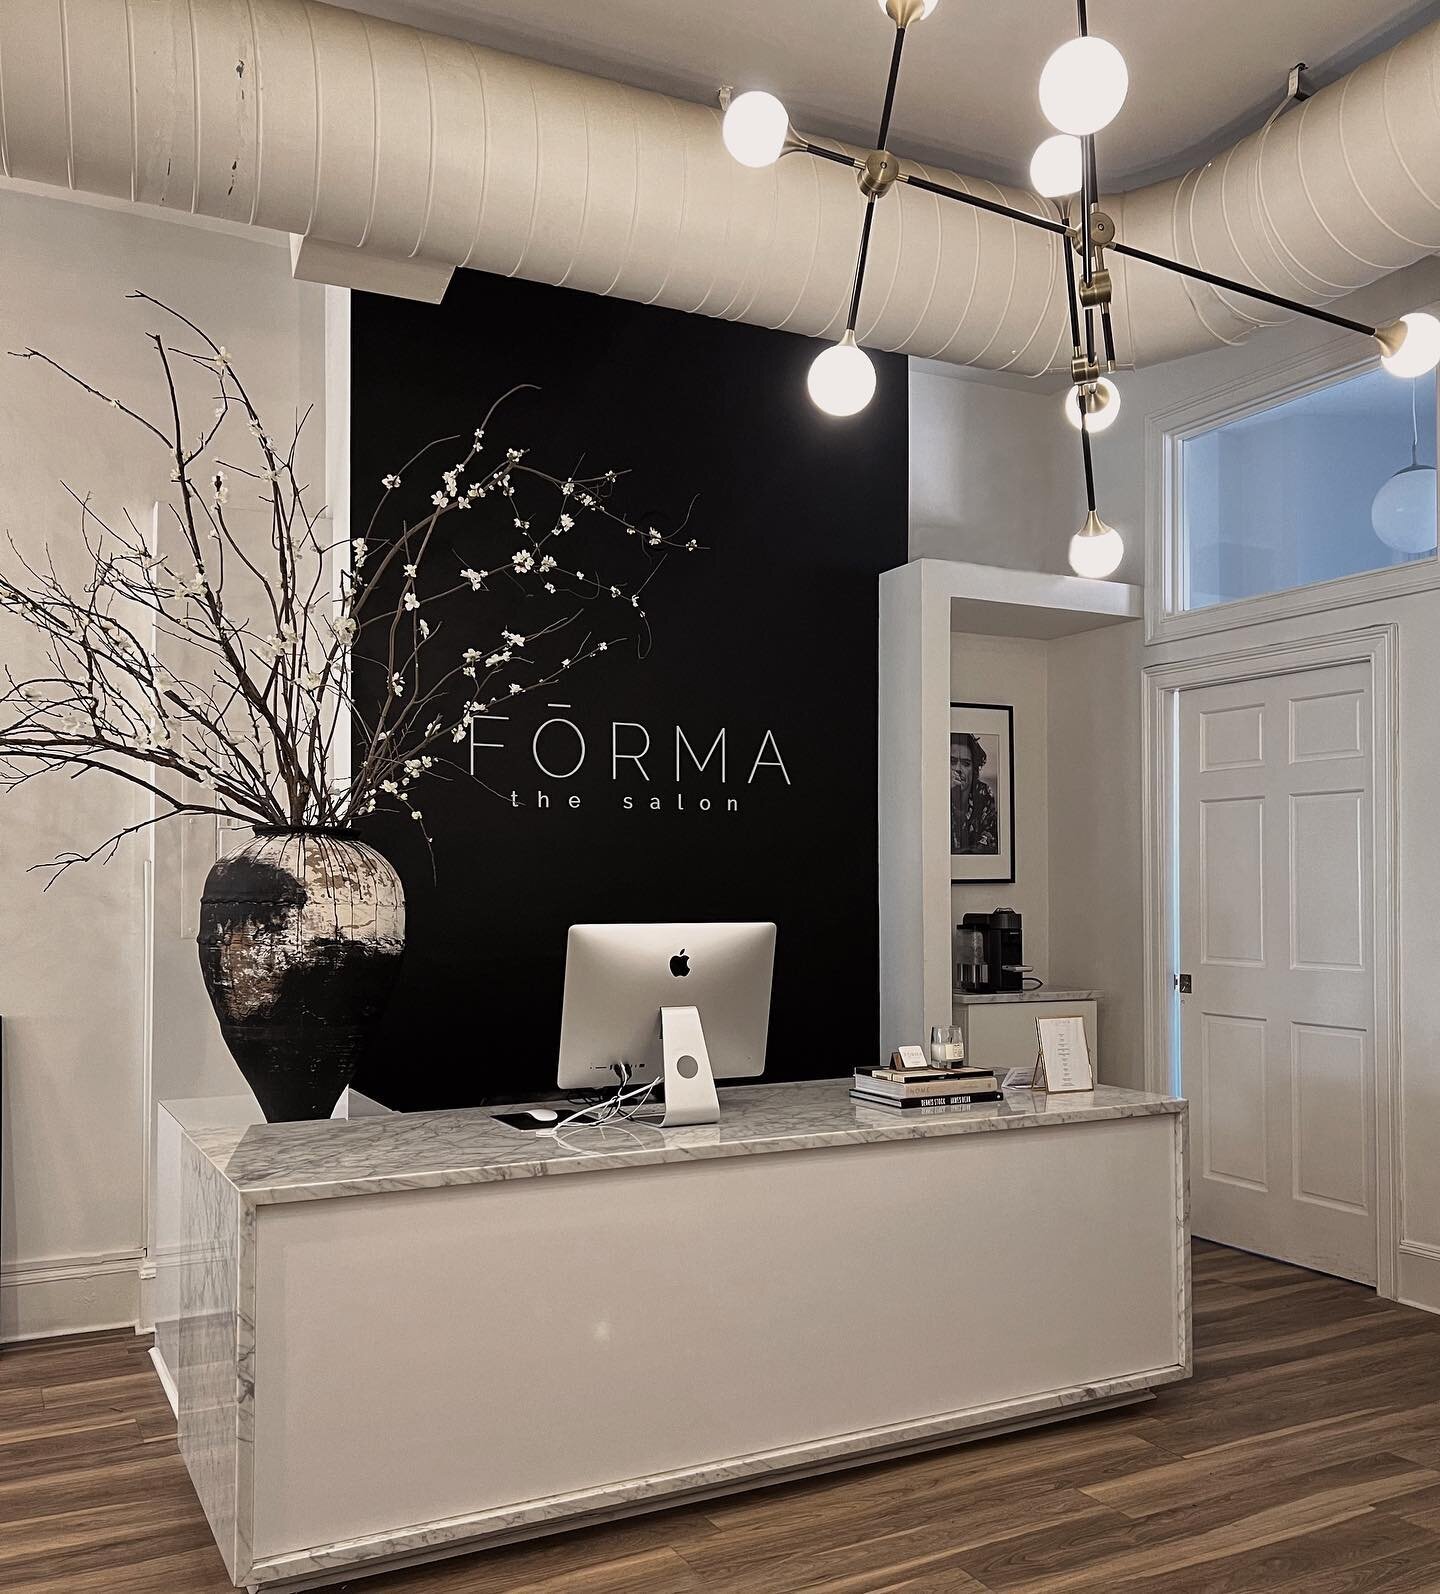 FŌRMA is in full bloom. Click the link in our bio to reserve an appointment !
.
.
.
#newburystreetsalon #salon #bostonhairsalon